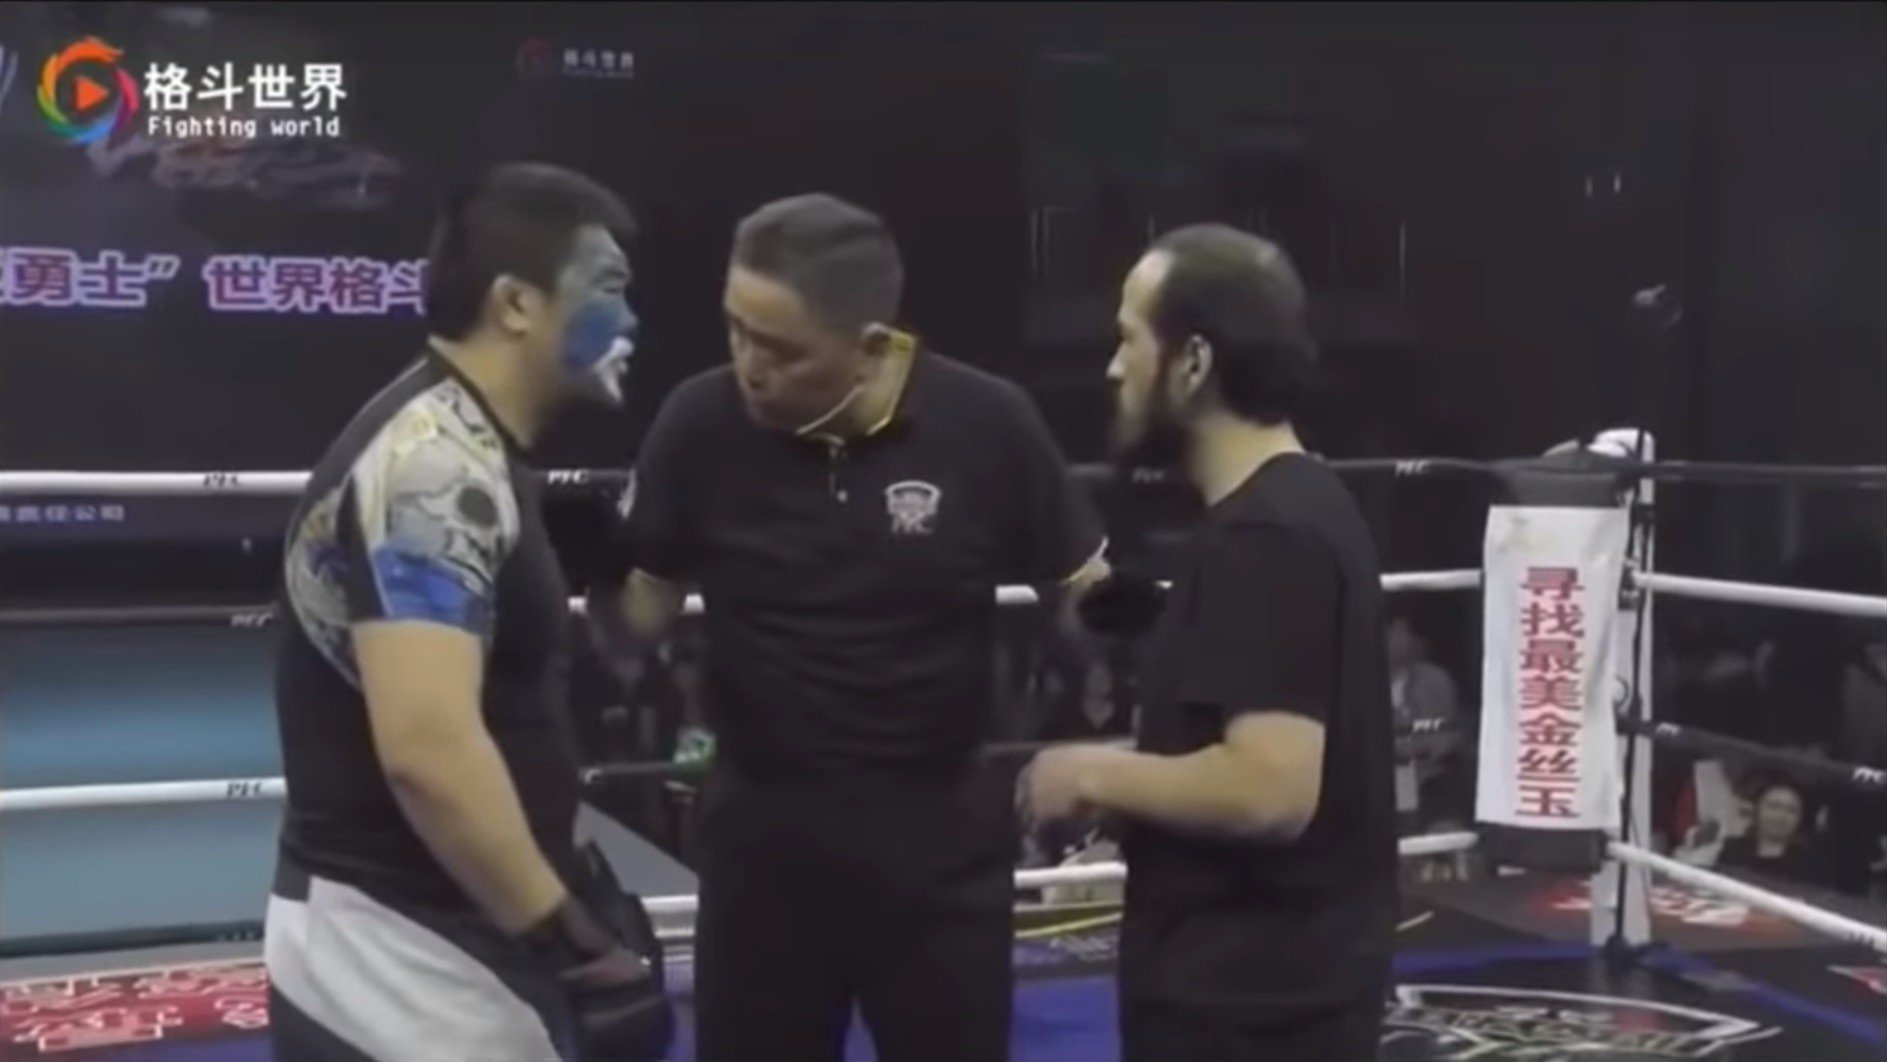 The referee speaks to Xu Xiaodong and Lv Gang before the fight. Photos: YouTube